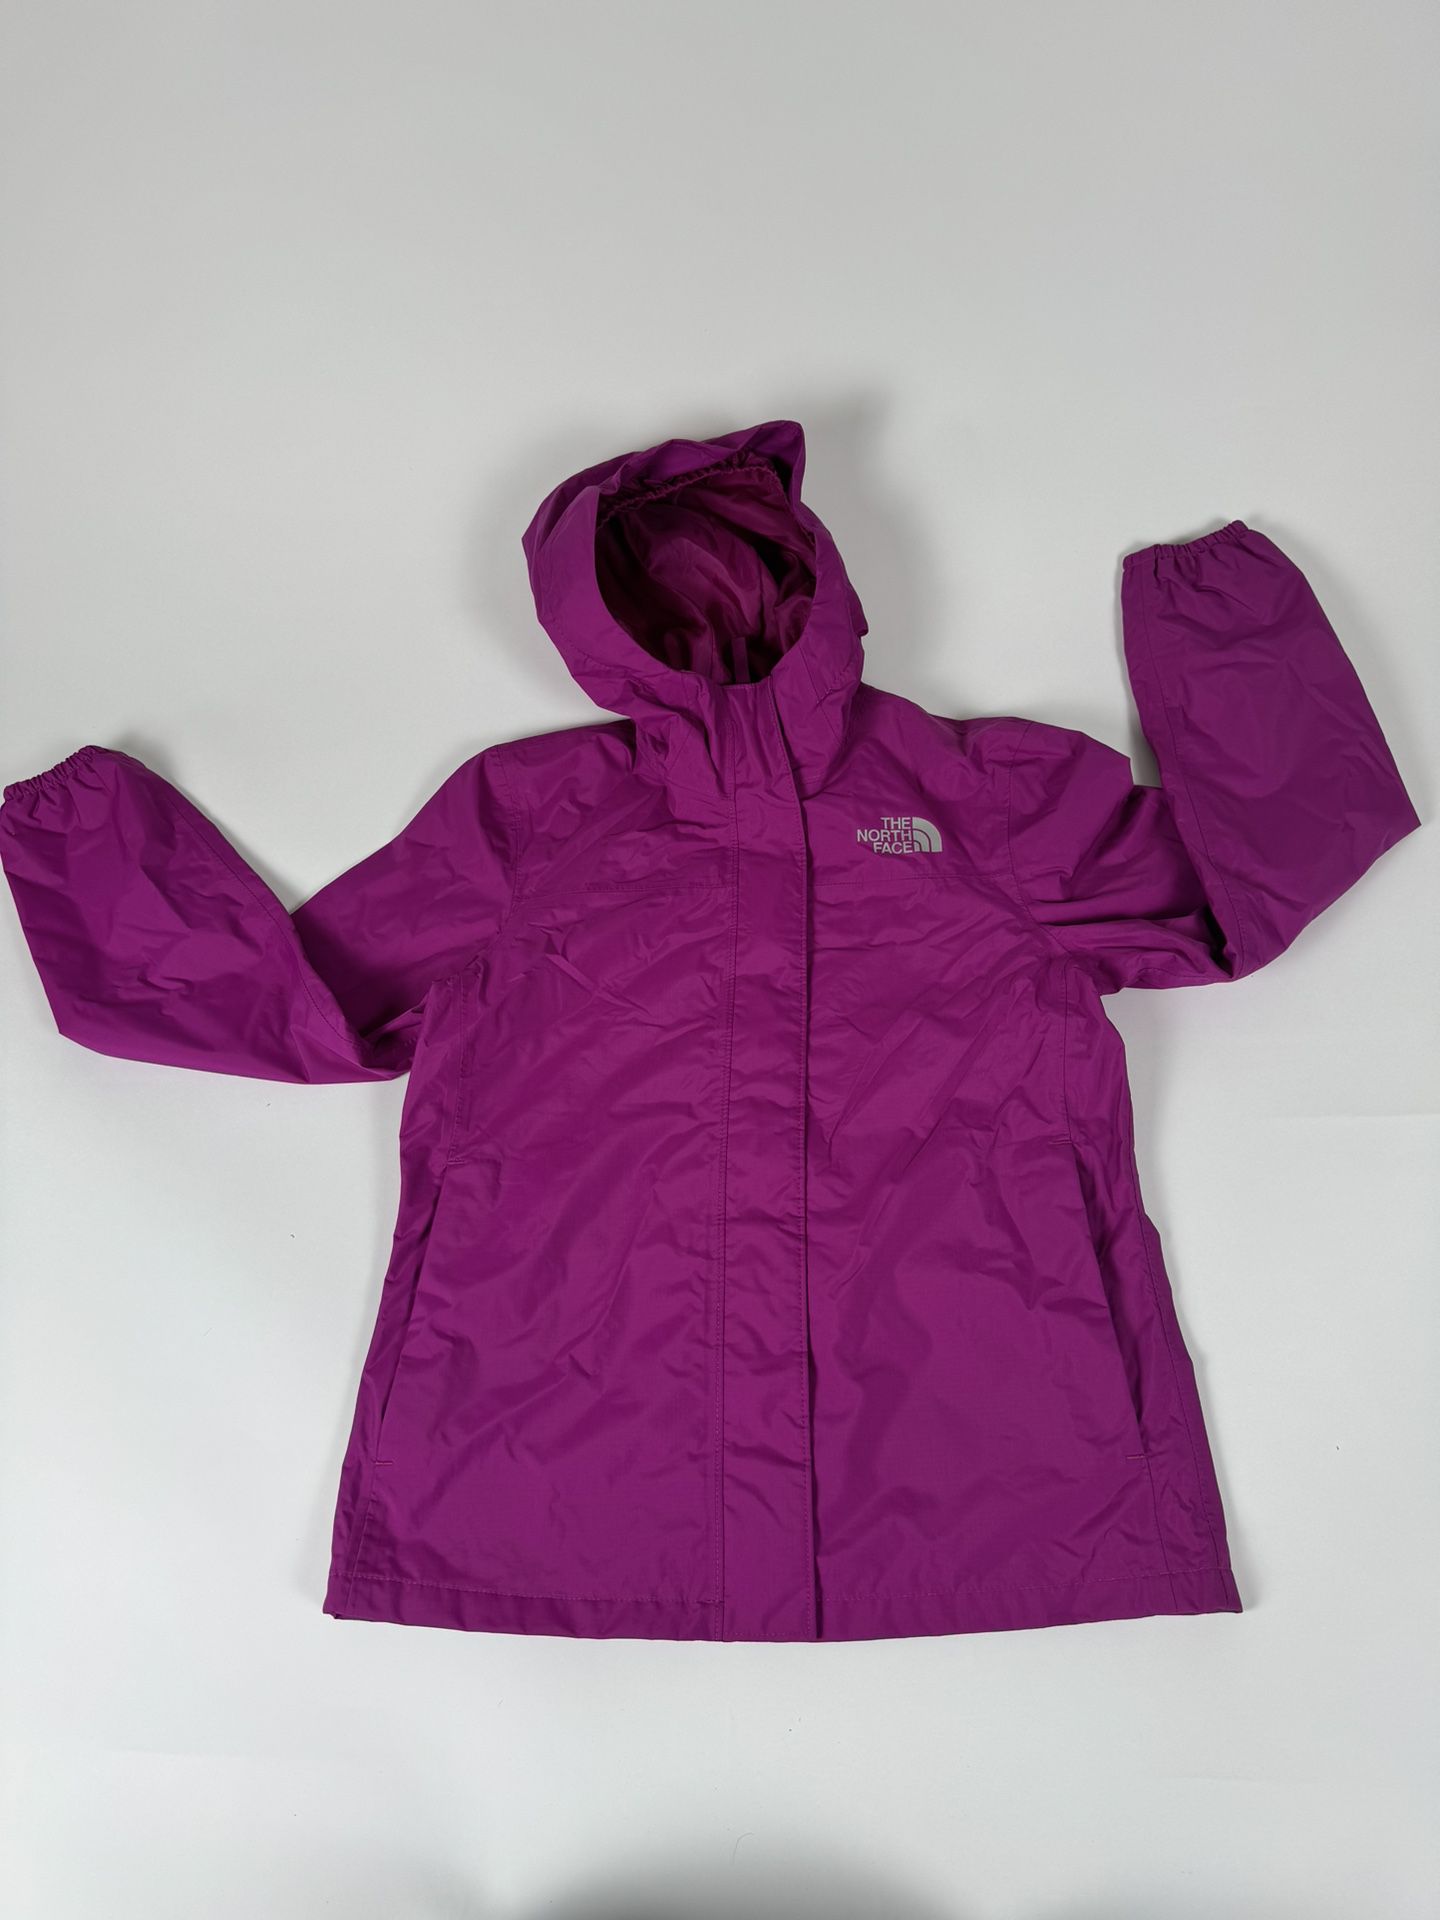 The North Face Jacket, DryVent Technology, Girls Size Large. 